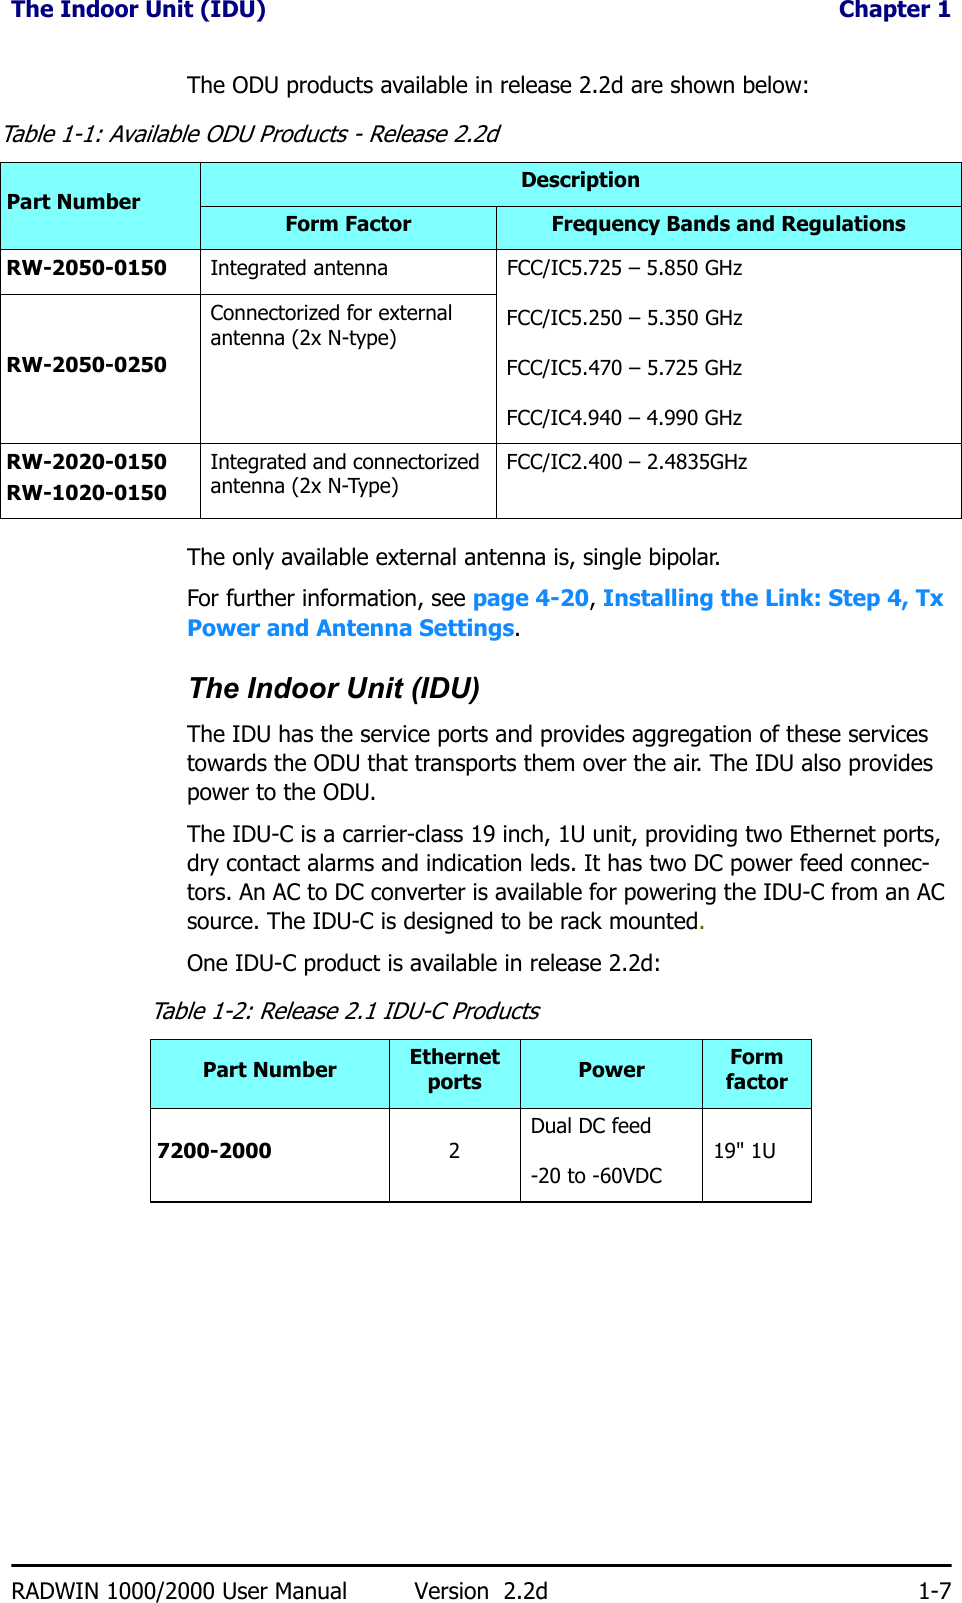 The Indoor Unit (IDU)  Chapter 1RADWIN 1000/2000 User Manual Version  2.2d 1-7The ODU products available in release 2.2d are shown below:The only available external antenna is, single bipolar.For further information, see page 4-20, Installing the Link: Step 4, Tx Power and Antenna Settings.The Indoor Unit (IDU)The IDU has the service ports and provides aggregation of these services towards the ODU that transports them over the air. The IDU also provides power to the ODU.The IDU-C is a carrier-class 19 inch, 1U unit, providing two Ethernet ports, dry contact alarms and indication leds. It has two DC power feed connec-tors. An AC to DC converter is available for powering the IDU-C from an AC source. The IDU-C is designed to be rack mounted.One IDU-C product is available in release 2.2d:Table 1-1: Available ODU Products - Release 2.2dPart NumberDescriptionForm Factor Frequency Bands and RegulationsRW-2050-0150 Integrated antenna  FCC/IC5.725 – 5.850 GHzFCC/IC5.250 – 5.350 GHz FCC/IC5.470 – 5.725 GHzFCC/IC4.940 – 4.990 GHzRW-2050-0250Connectorized for external antenna (2x N-type)RW-2020-0150RW-1020-0150Integrated and connectorized antenna (2x N-Type) FCC/IC2.400 – 2.4835GHzTable 1-2: Release 2.1 IDU-C ProductsPart Number Ethernet ports Power Form factor7200-2000 2Dual DC feed-20 to -60VDC 19&quot; 1U